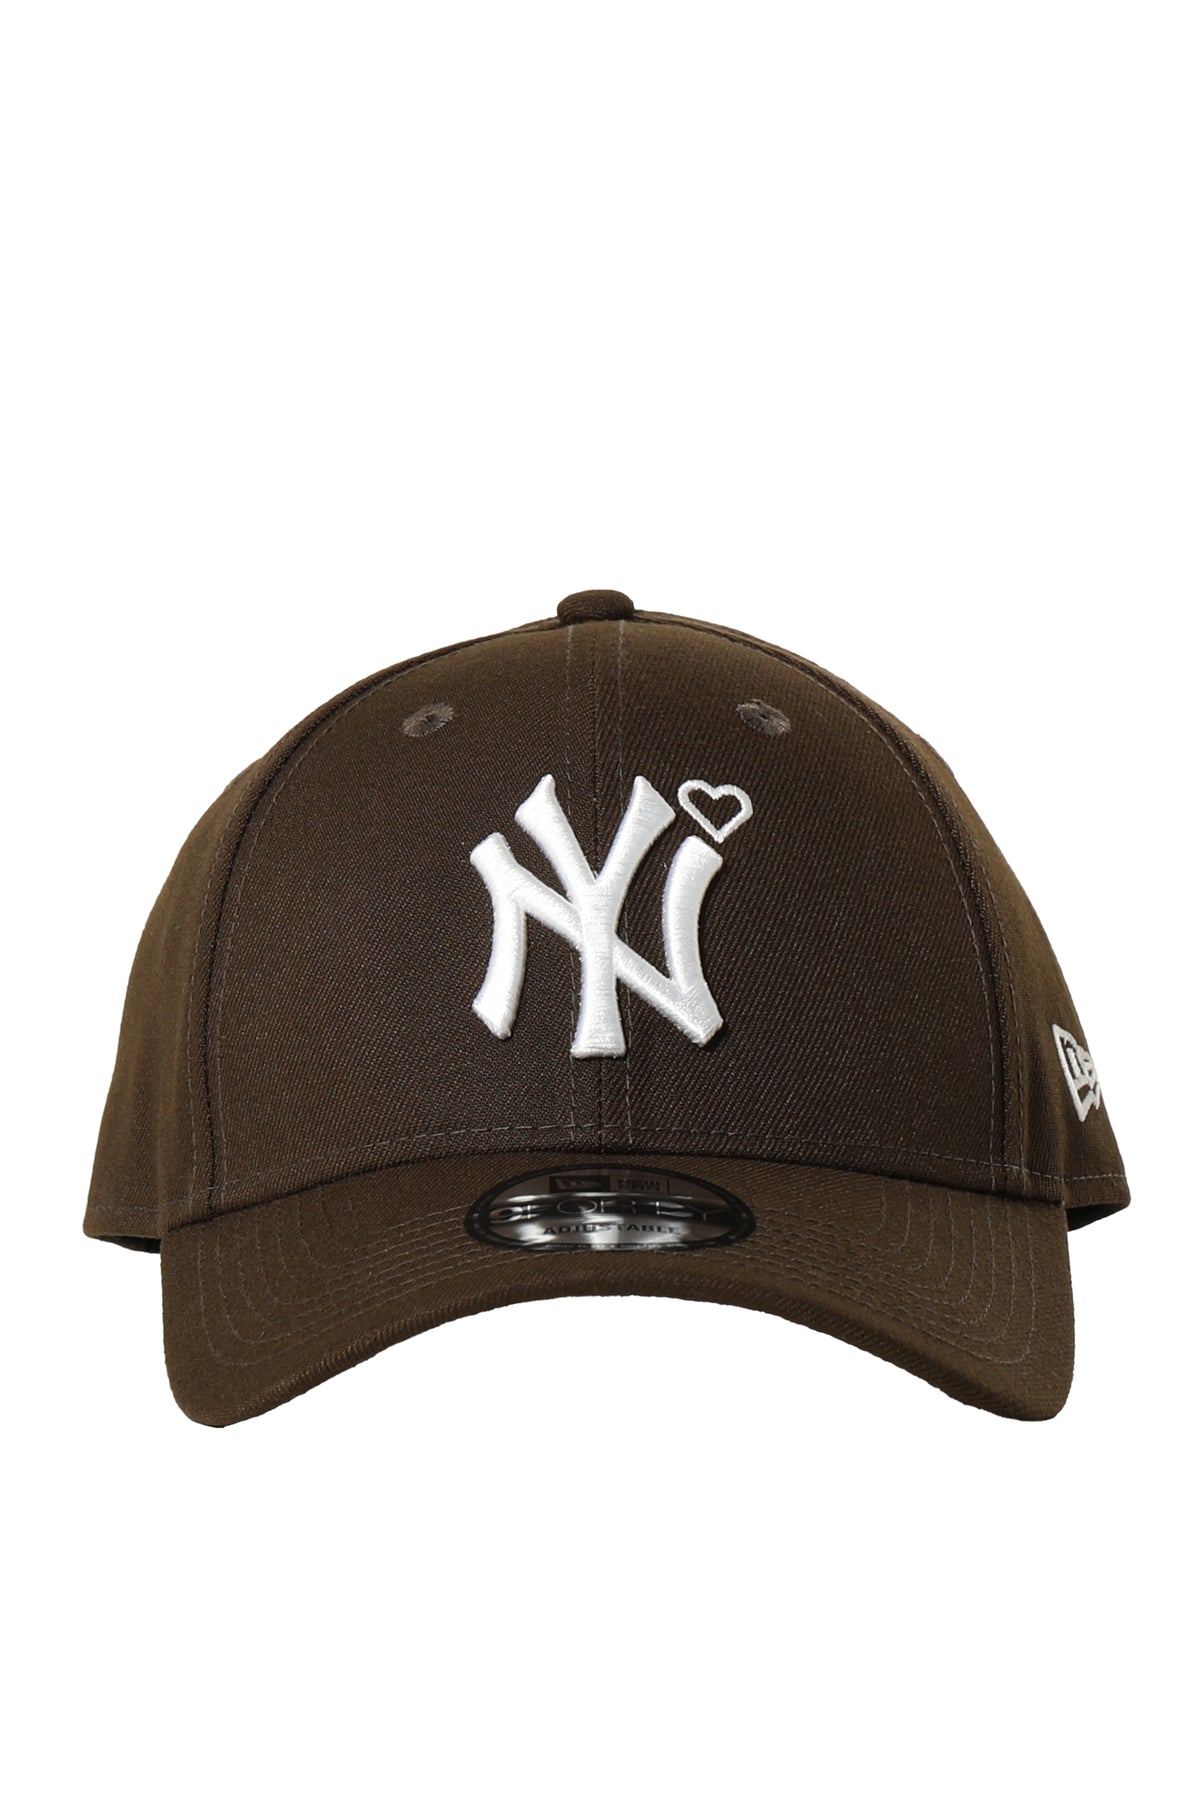 9 FORTY YANKEES HEART EMBROIDERY CAP / BRW/WHT